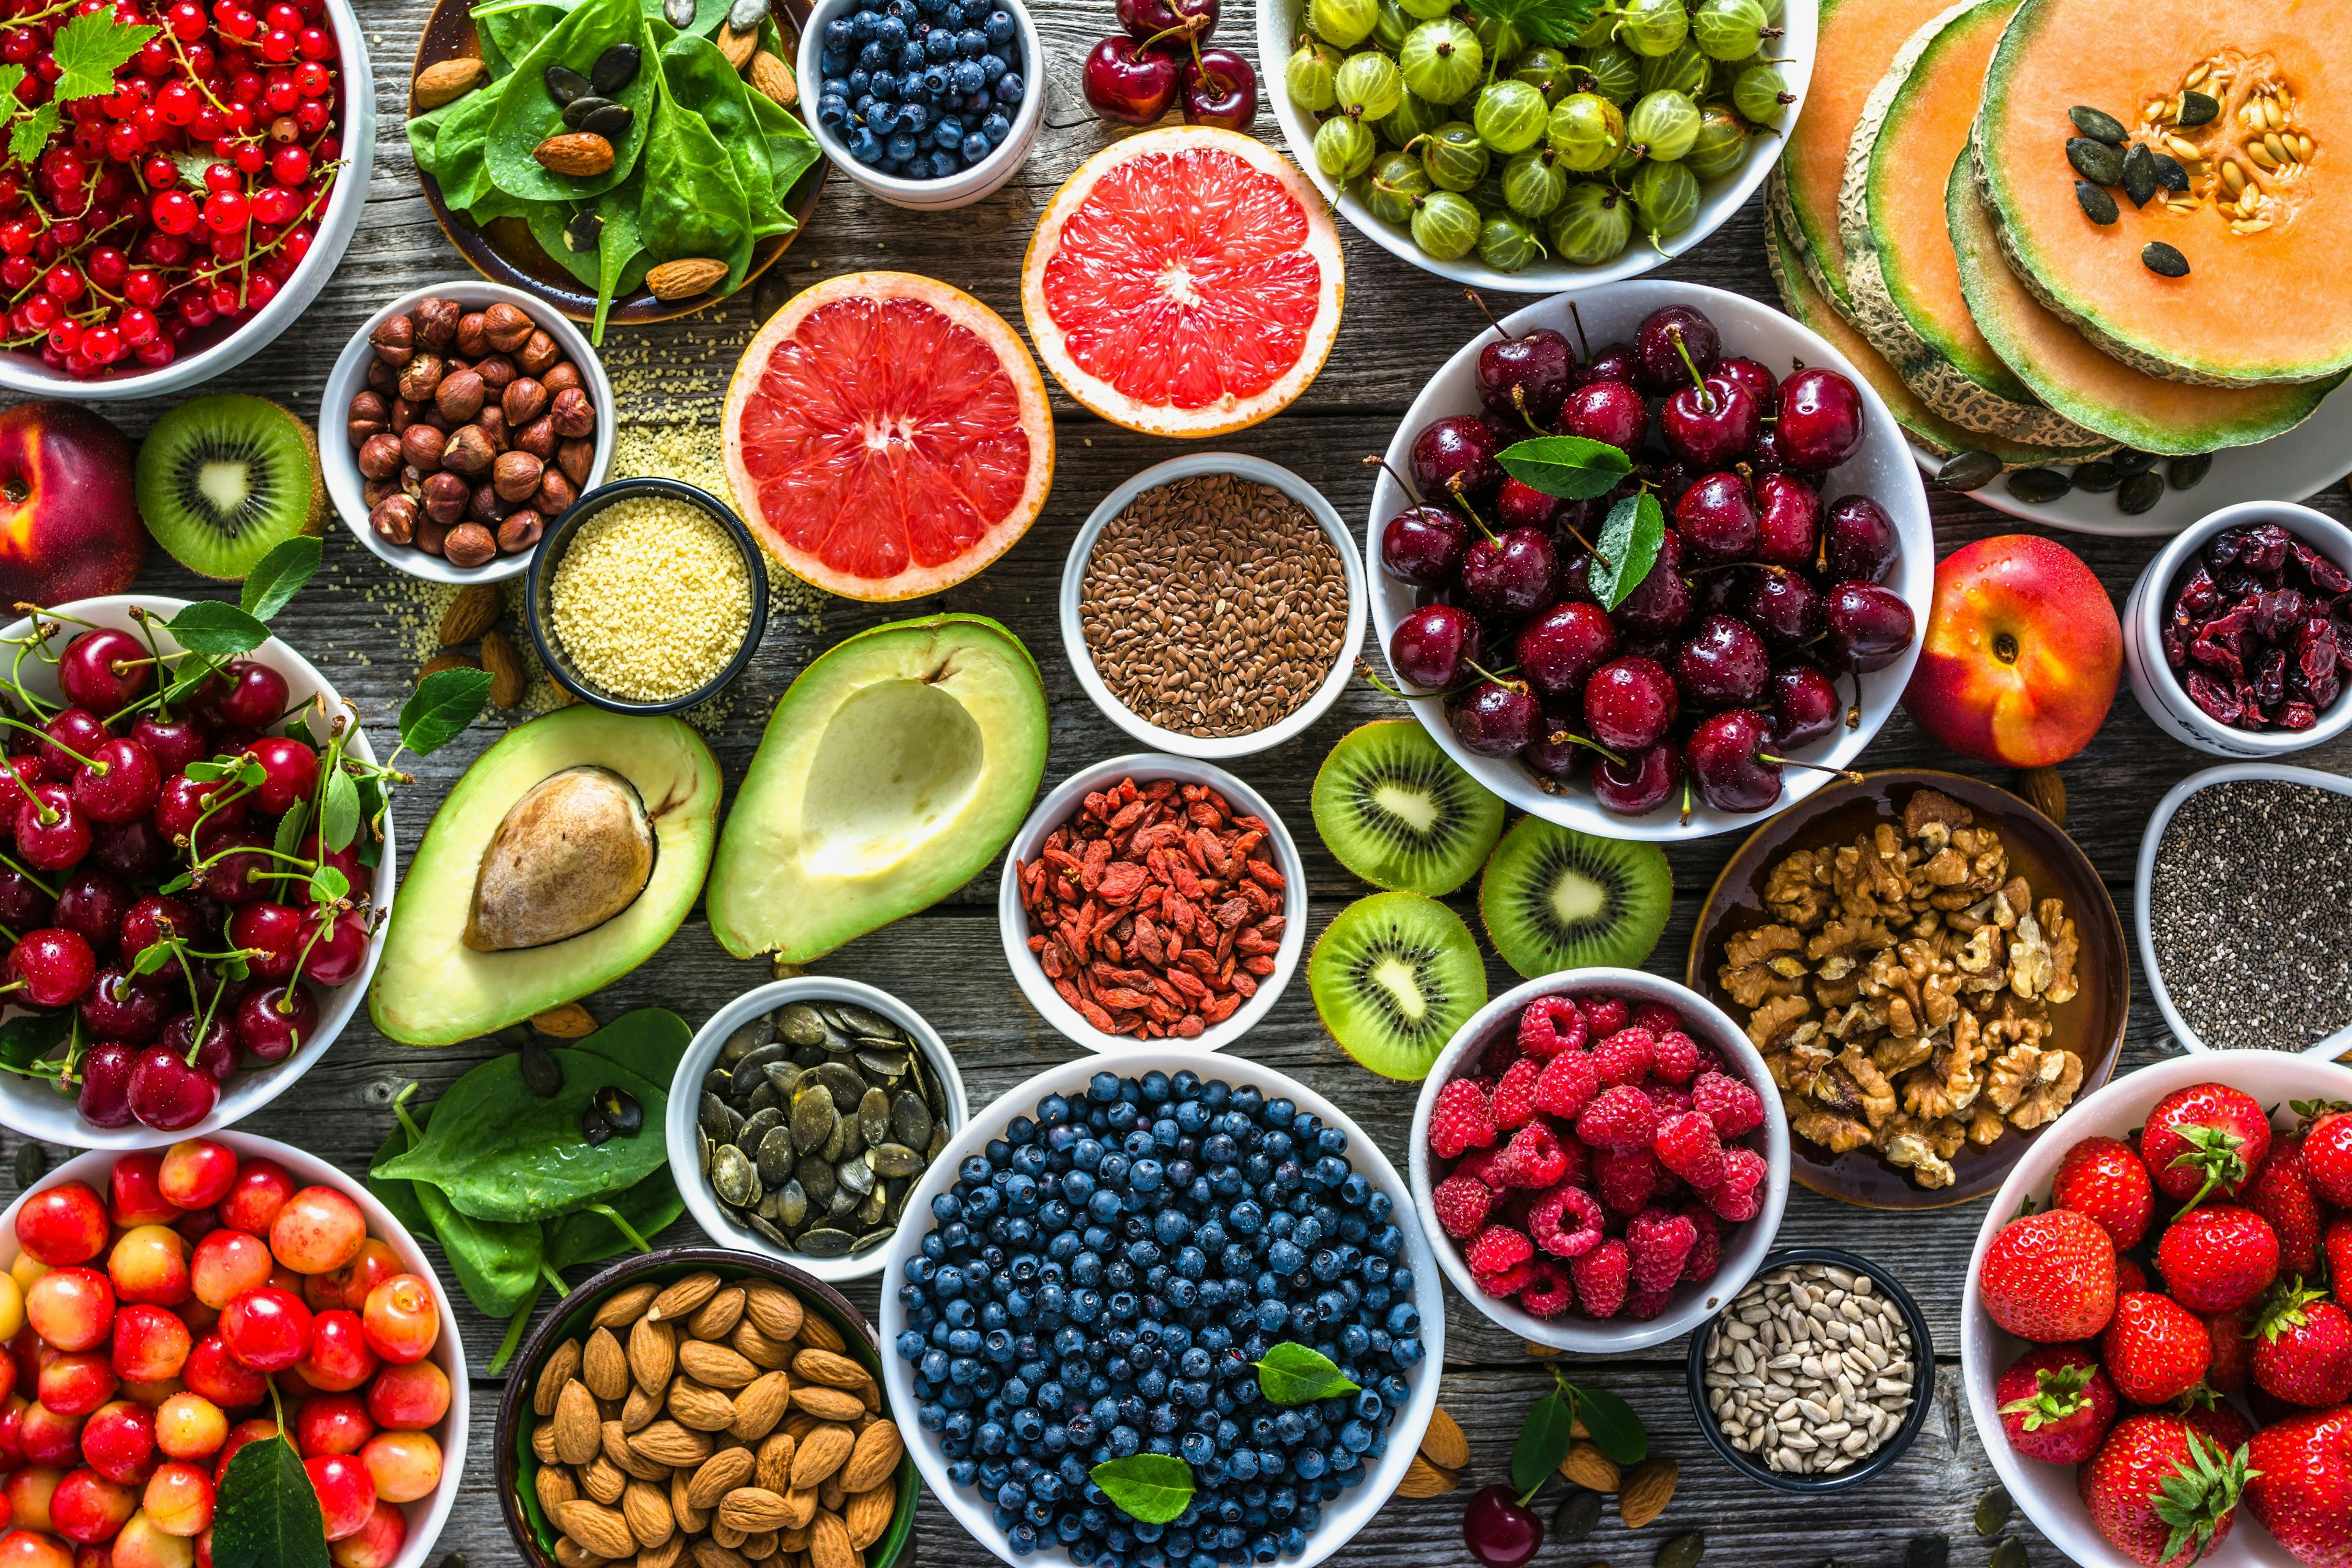 How a Nutritious Diet May Help During Myeloma Treatment